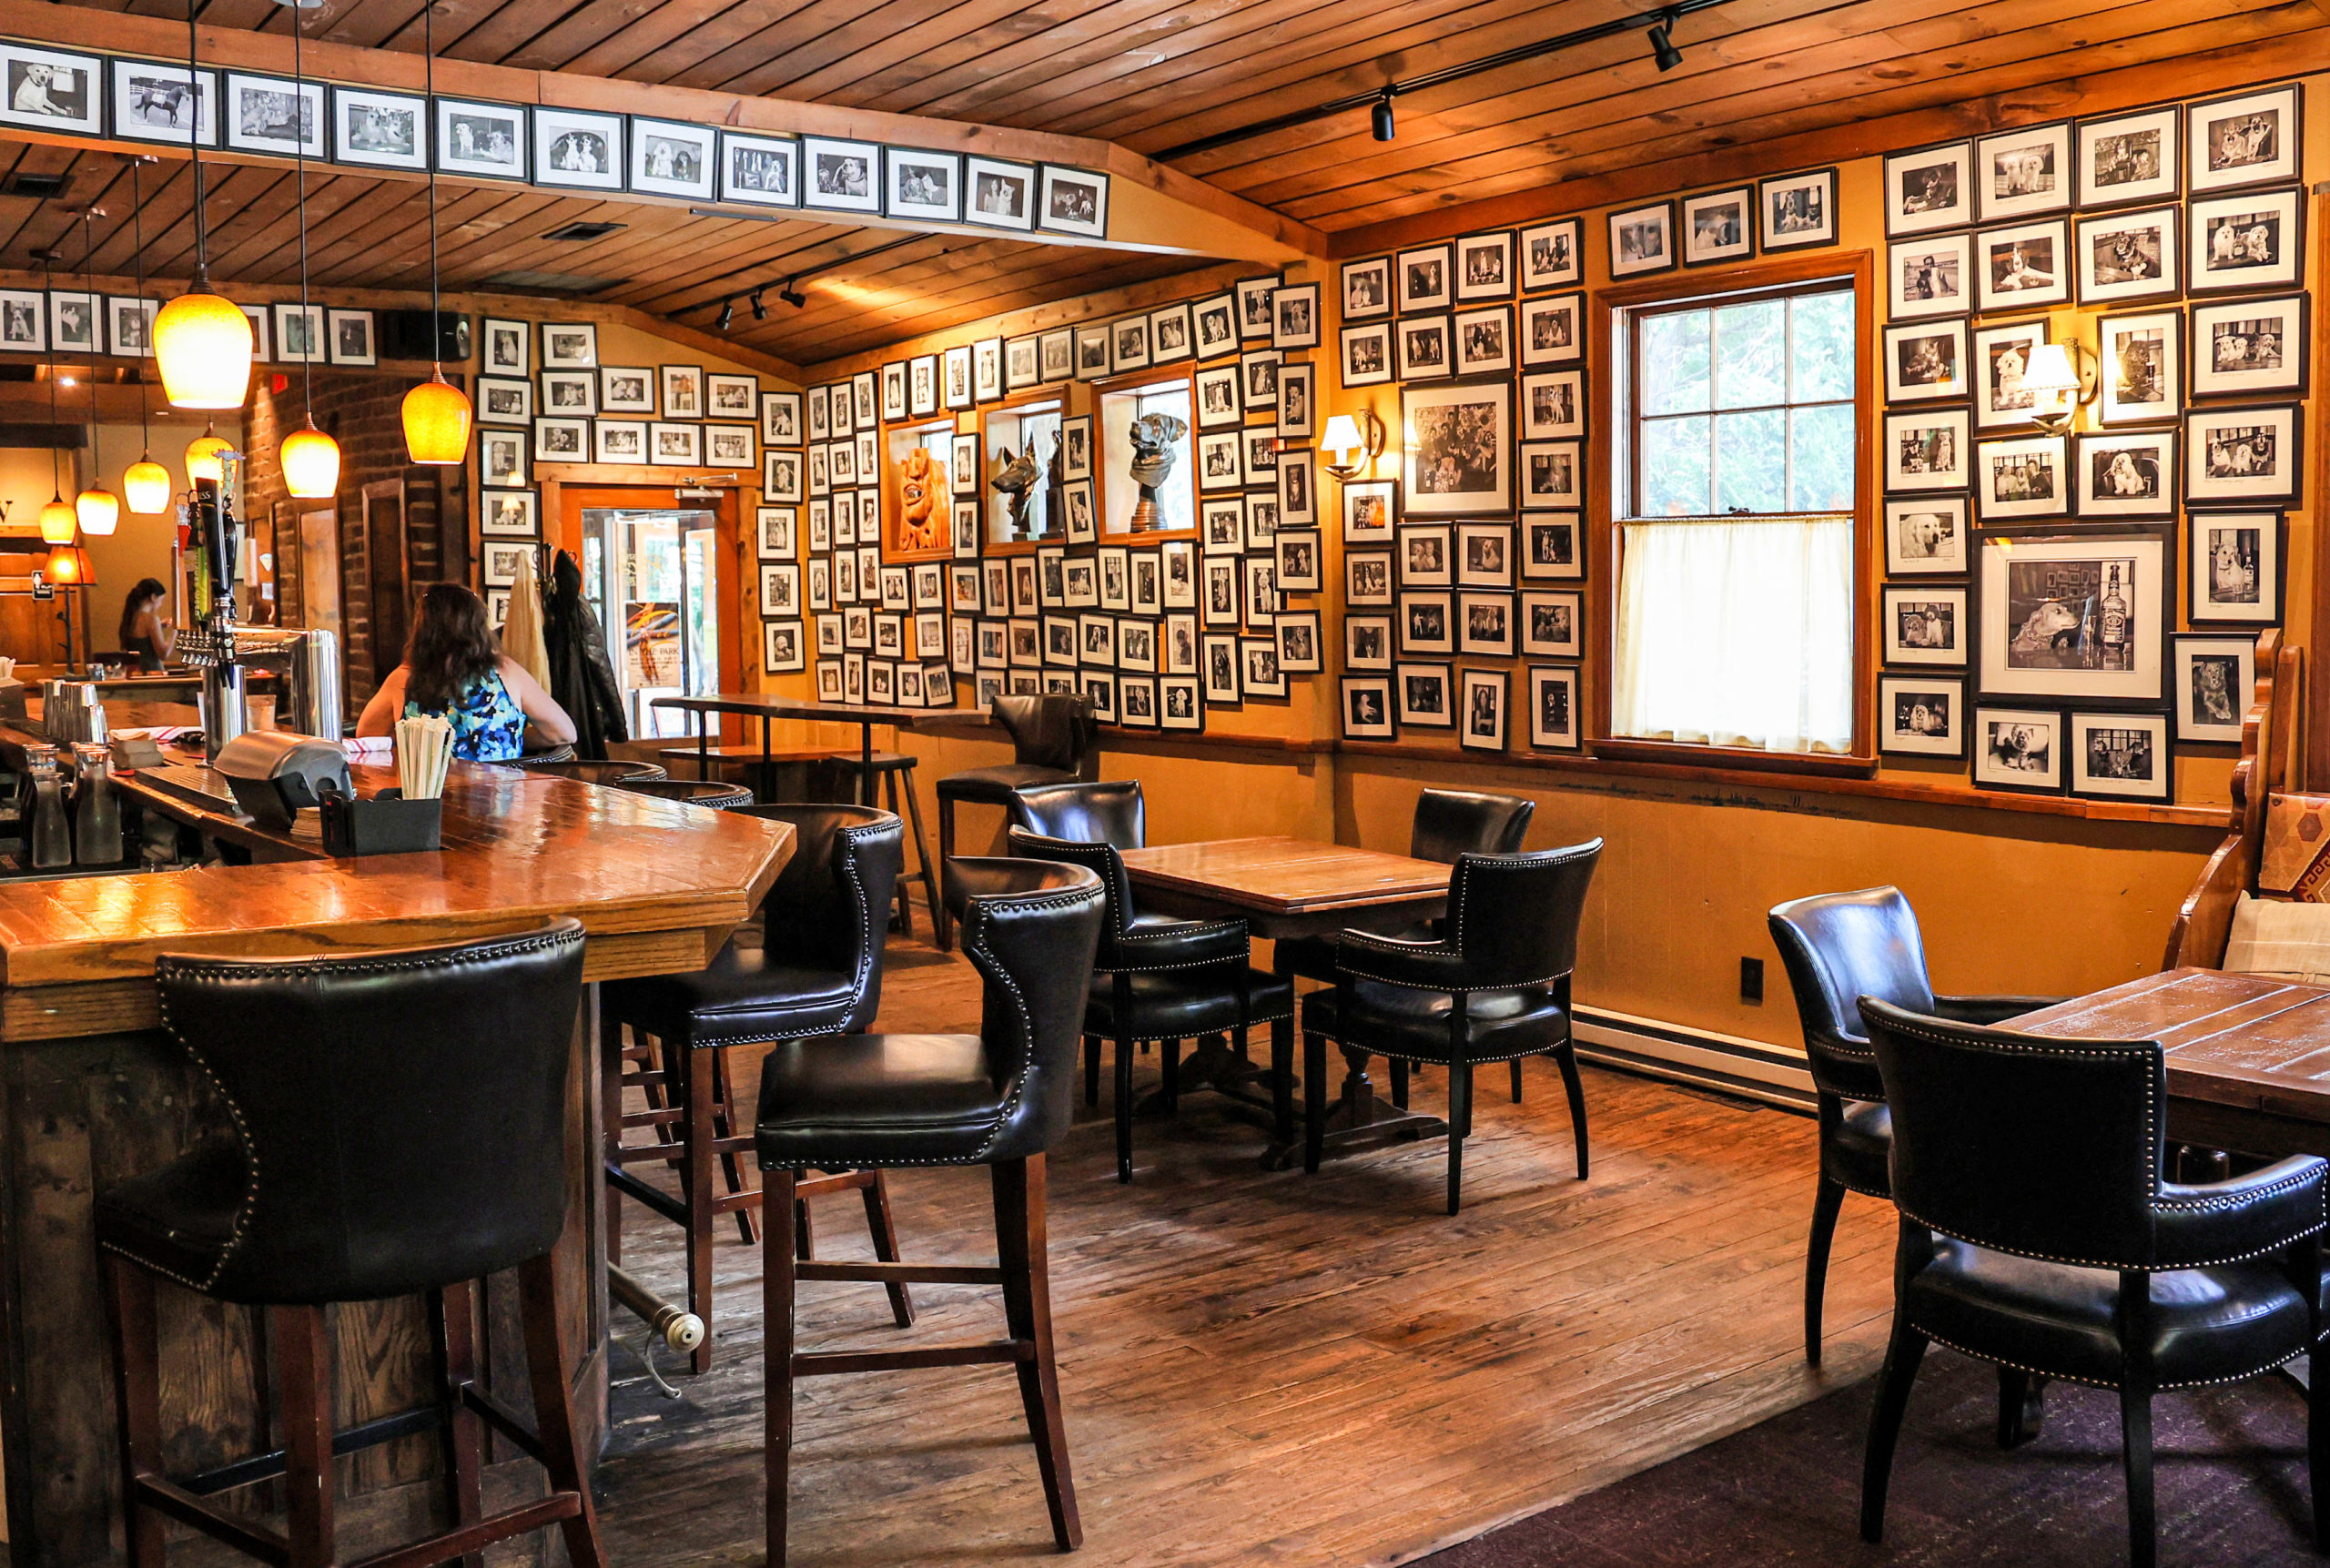 Black and white pet portraits fill the walls at a cozy restaurant bar.